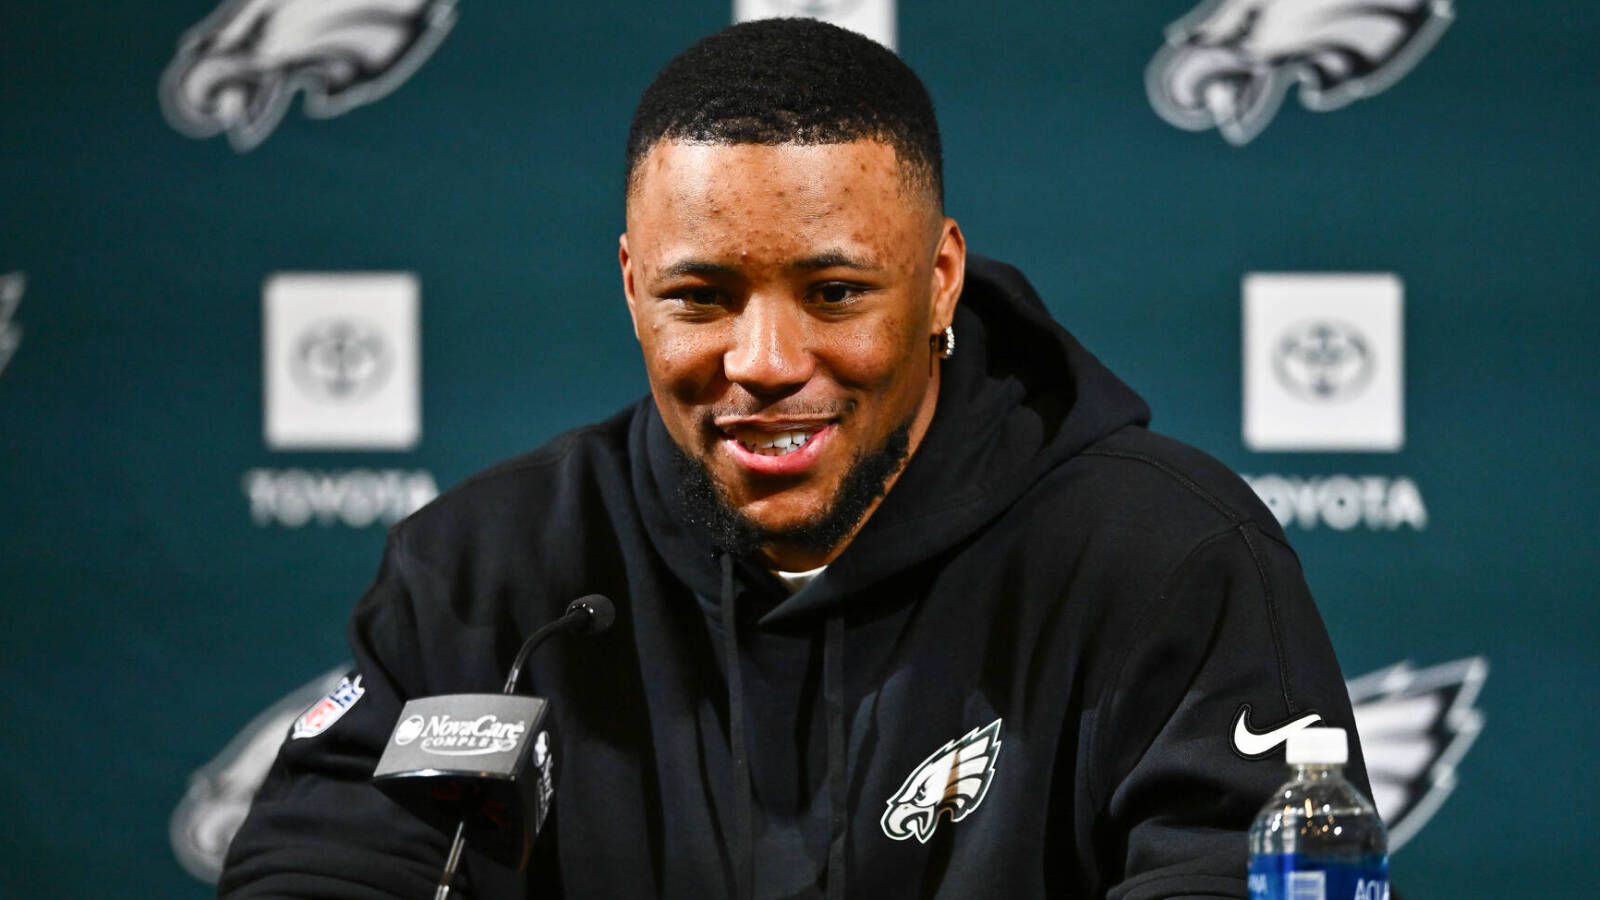 Saquon Barkley claims Giants never gave him offer to return